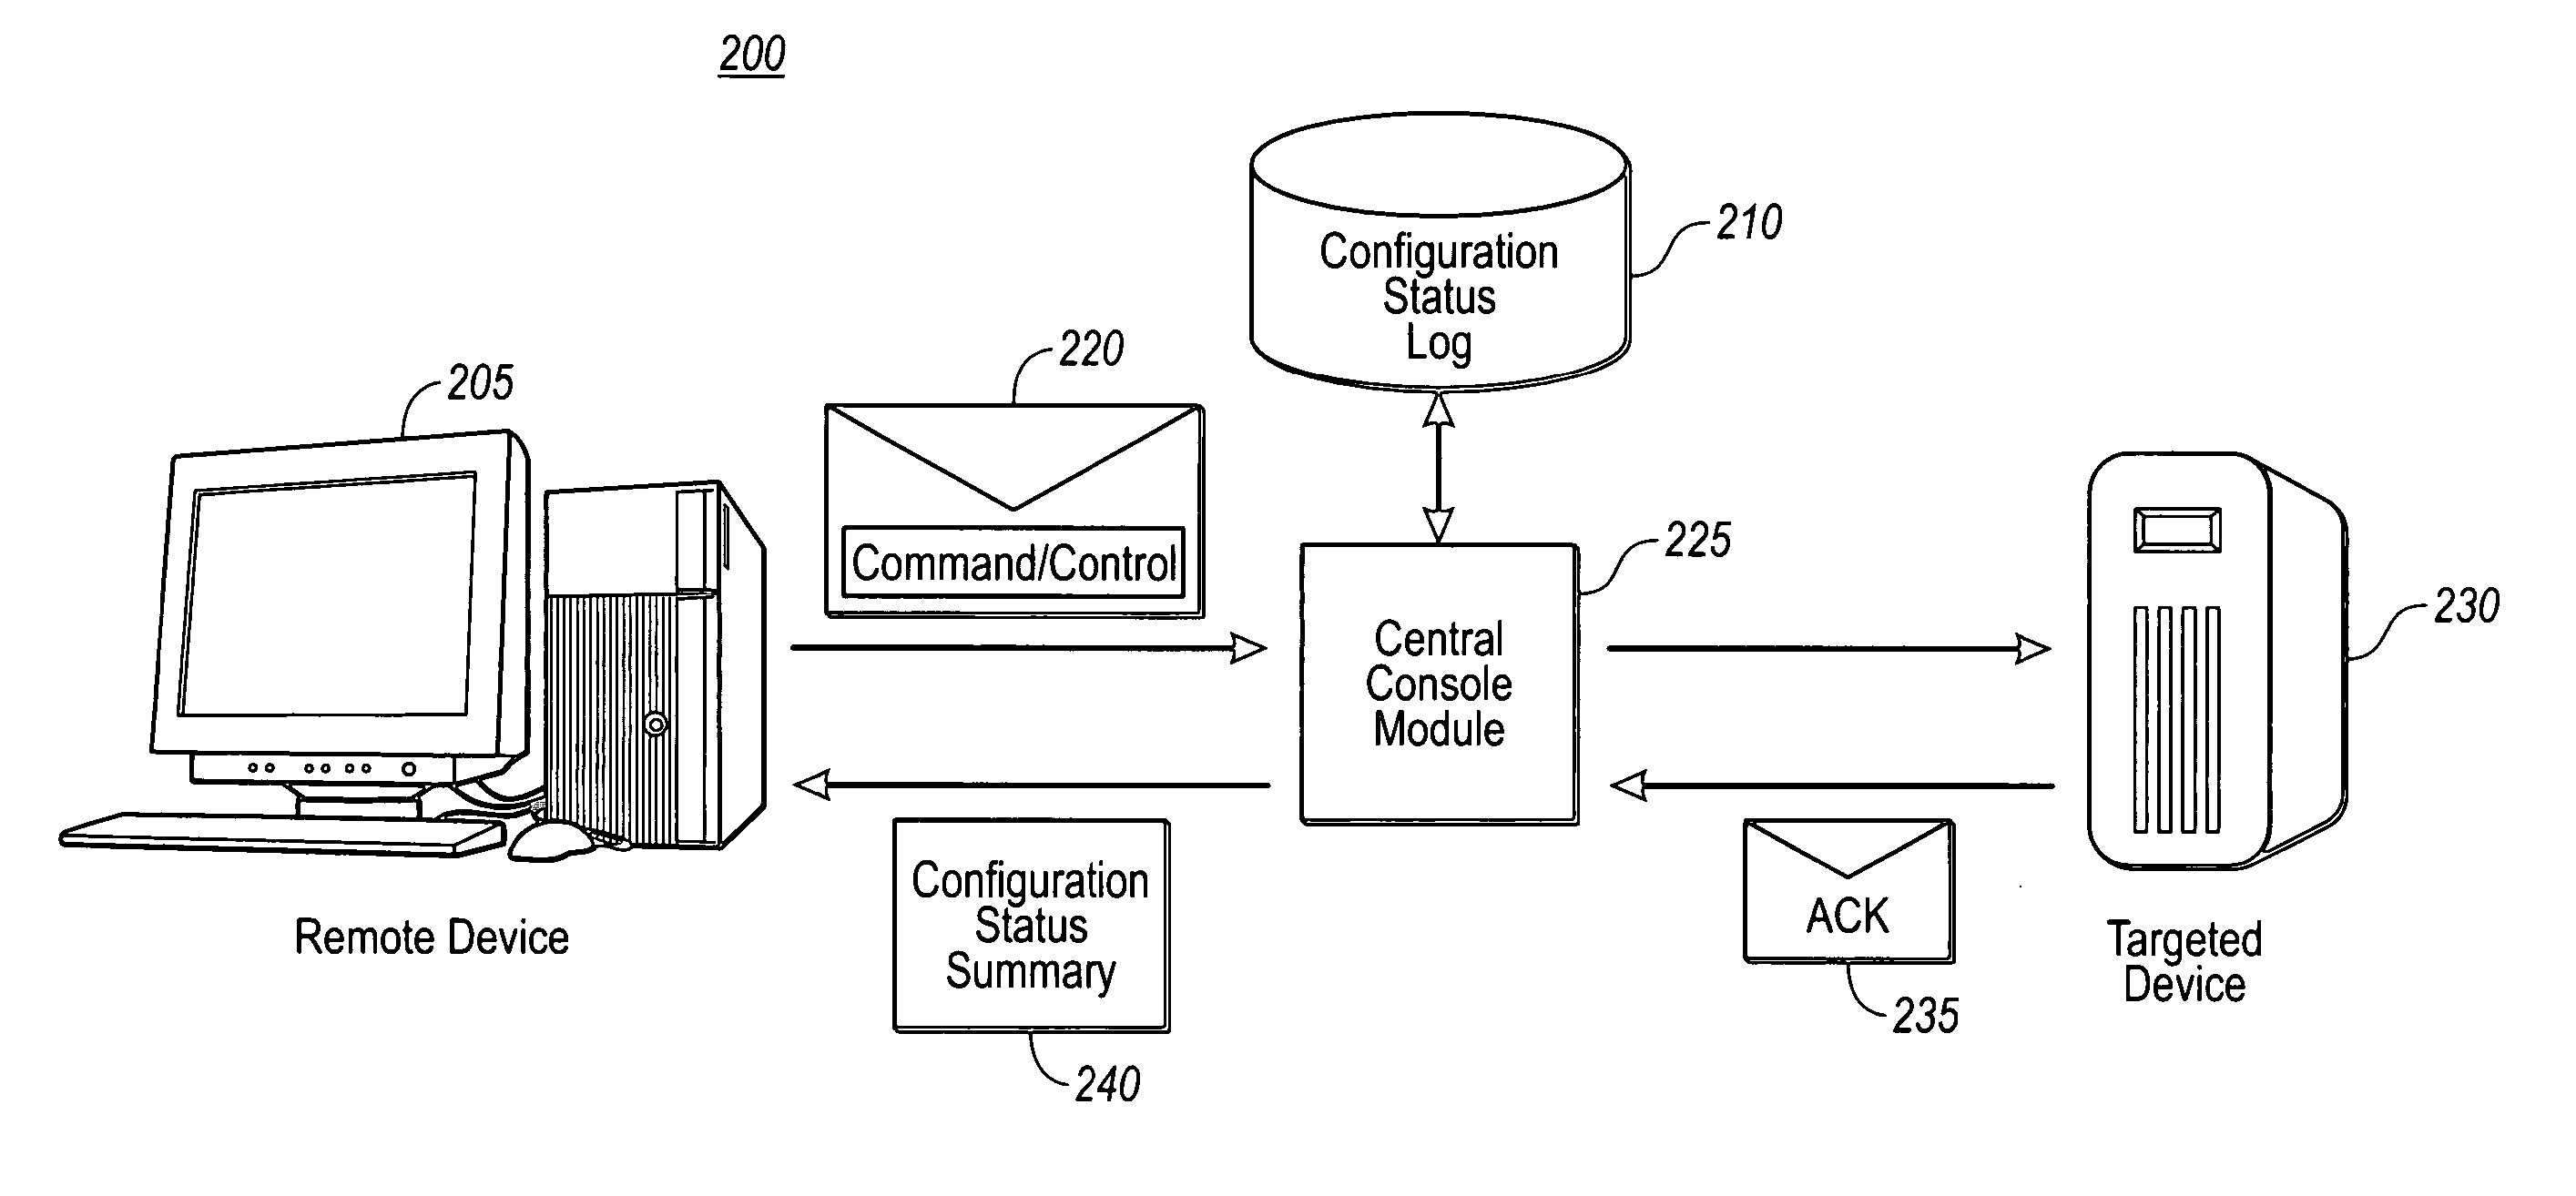 Secure remote configuration of targeted devices using a standard message transport protocol